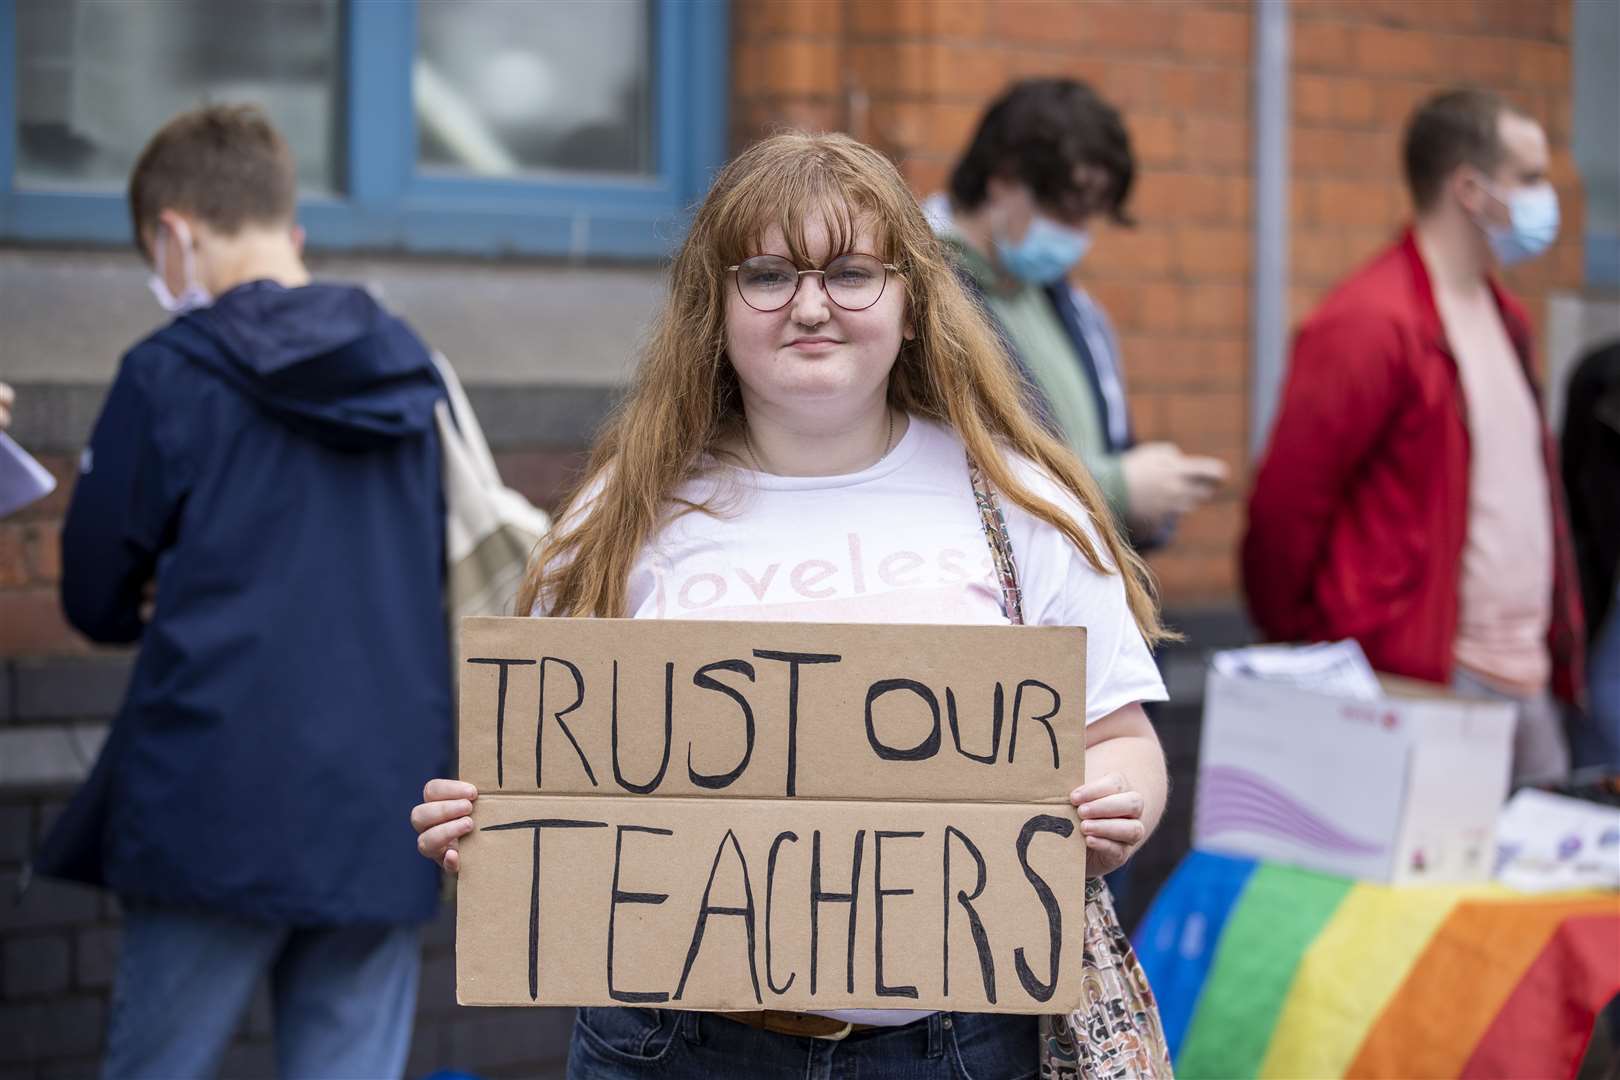 Zara Meadows, an AS-level student from Belfast Royal Academy, poses during an August protest at the Northern Ireland Education Authority in Belfast, over Northern Ireland Minister of Education Peter Weir’s decision on A-level results (Liam McBurney/PA)